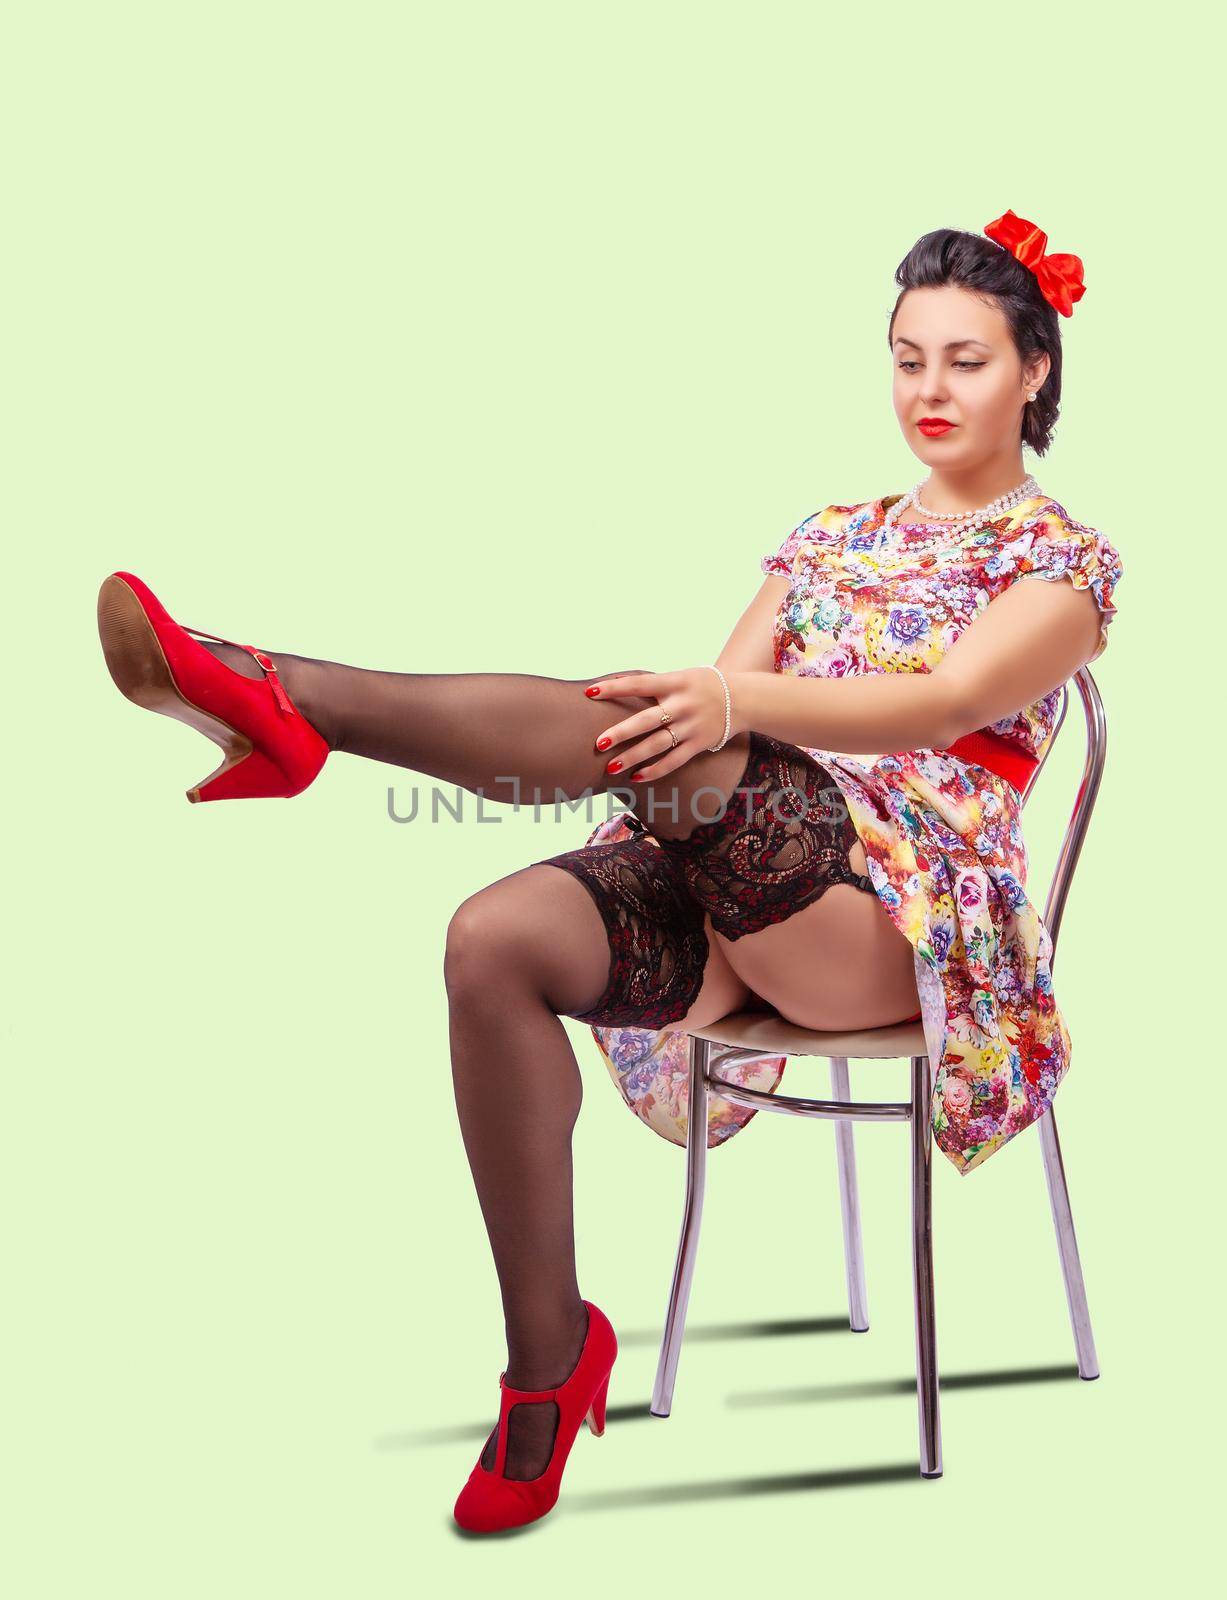 woman straightens her stocking while sitting on a chair in studio. pinup style